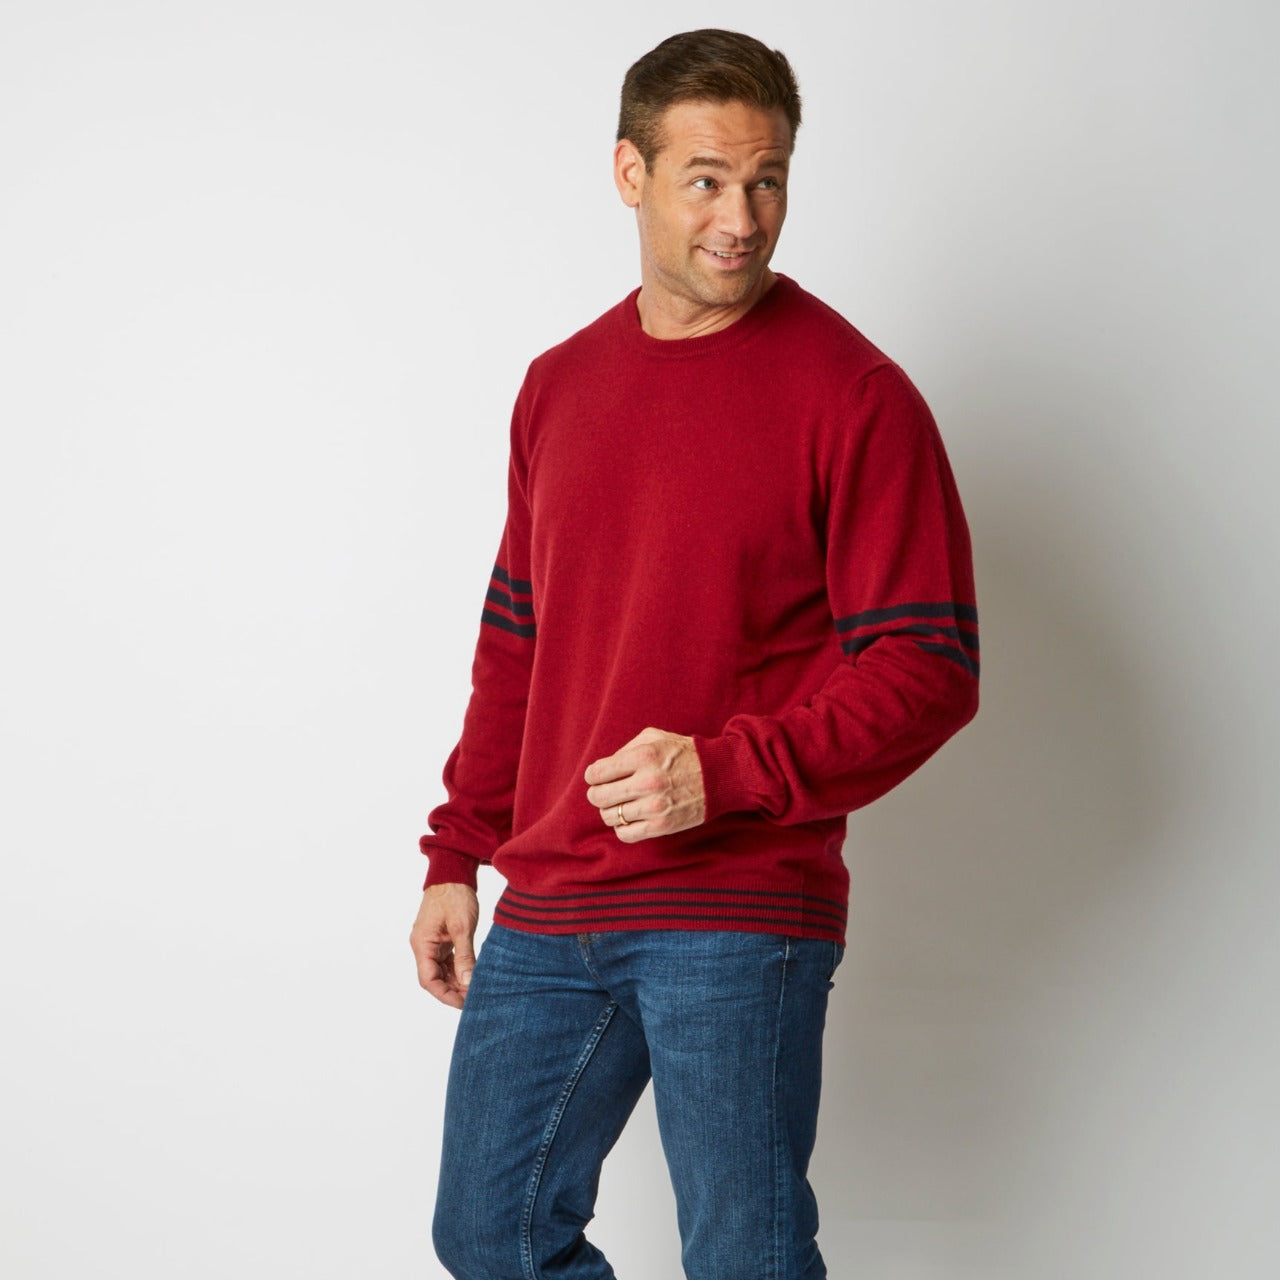 100% CASHMERE CHERRY RED / NAVY STRIPED SLEEVE CREW